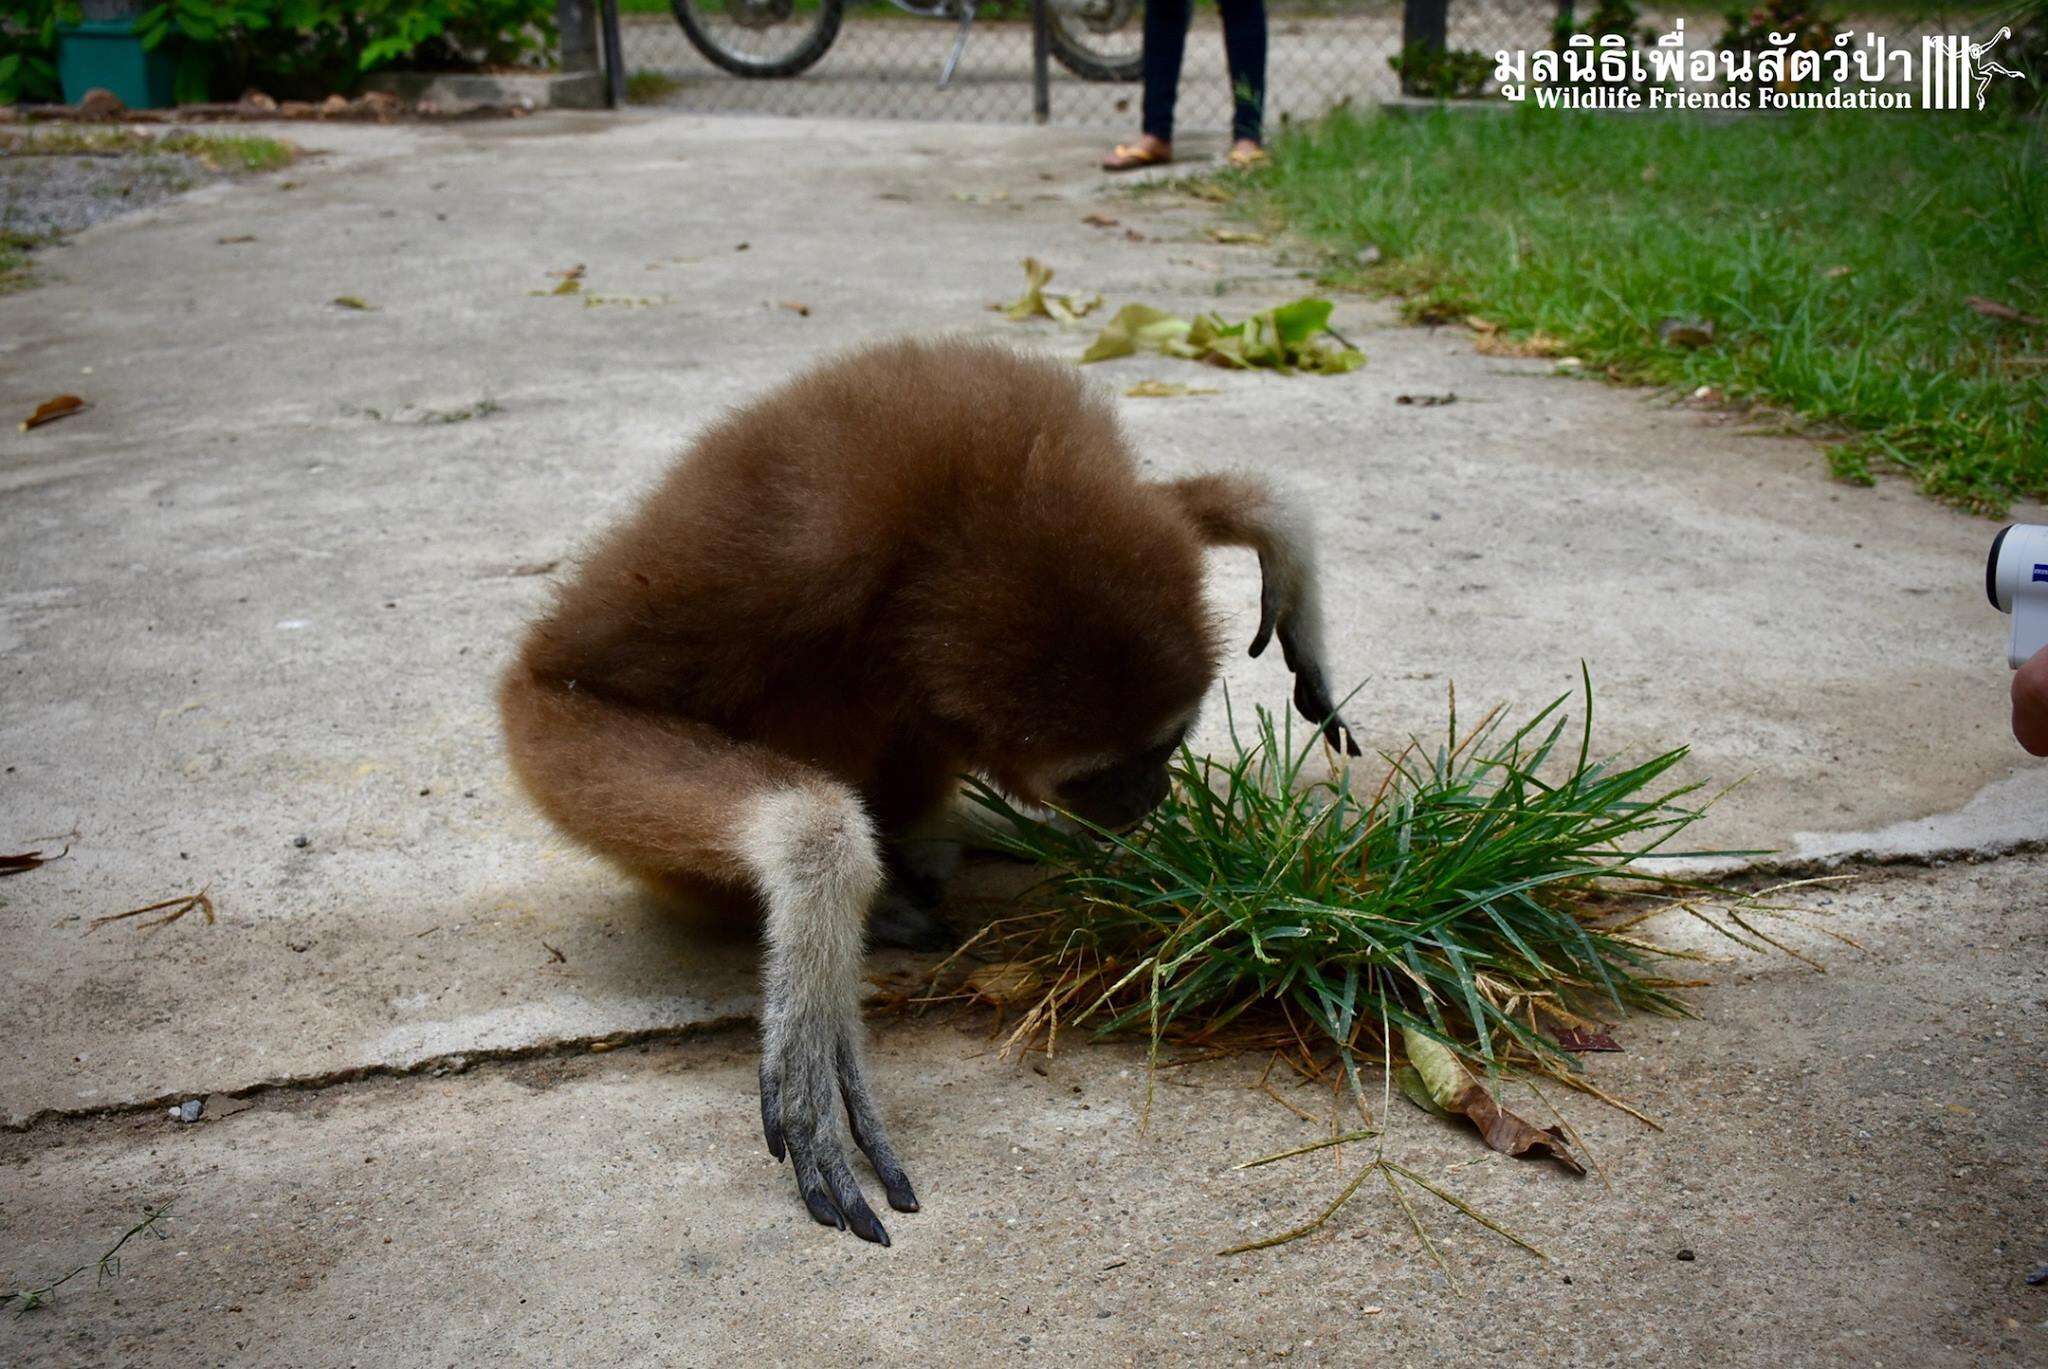 Rescued gibbon sniffs the grass